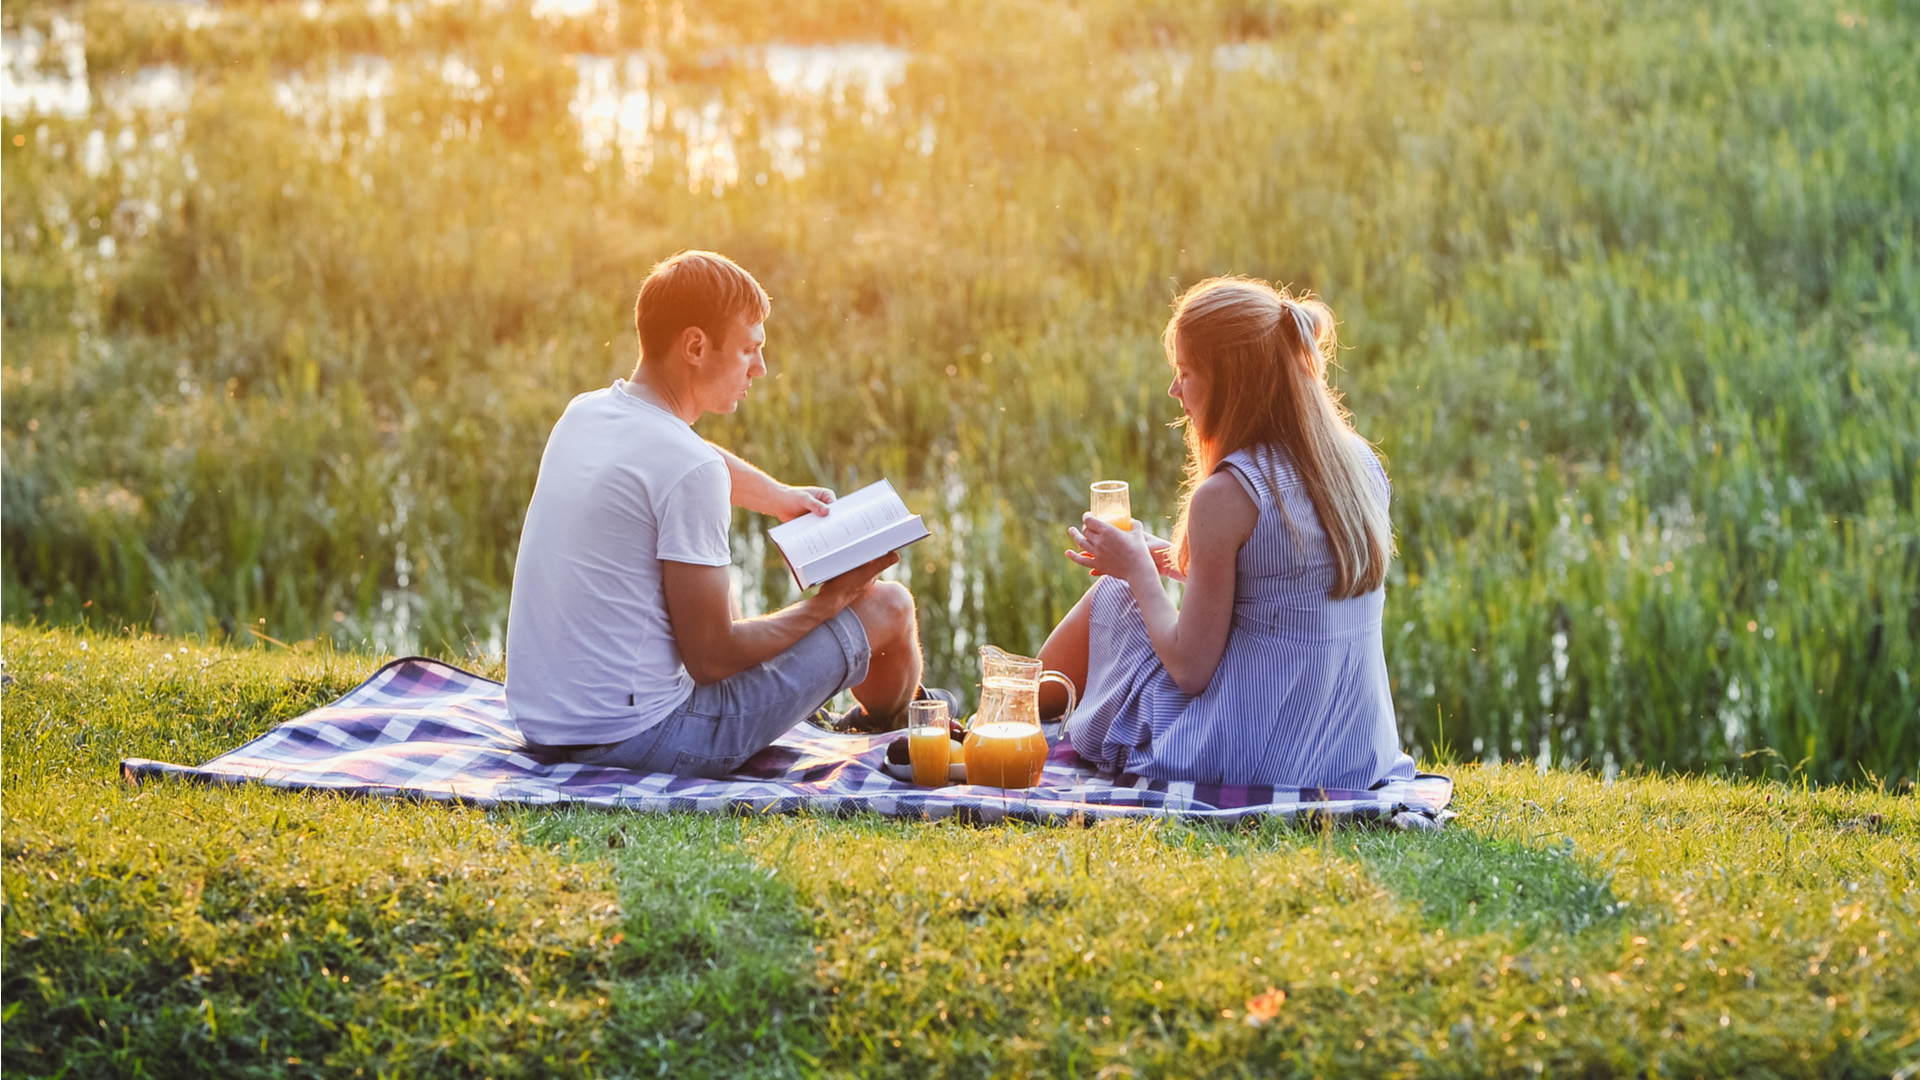 Man in white shirt reading book sitting down in a park with woman next to him drinking glass of orange juice.